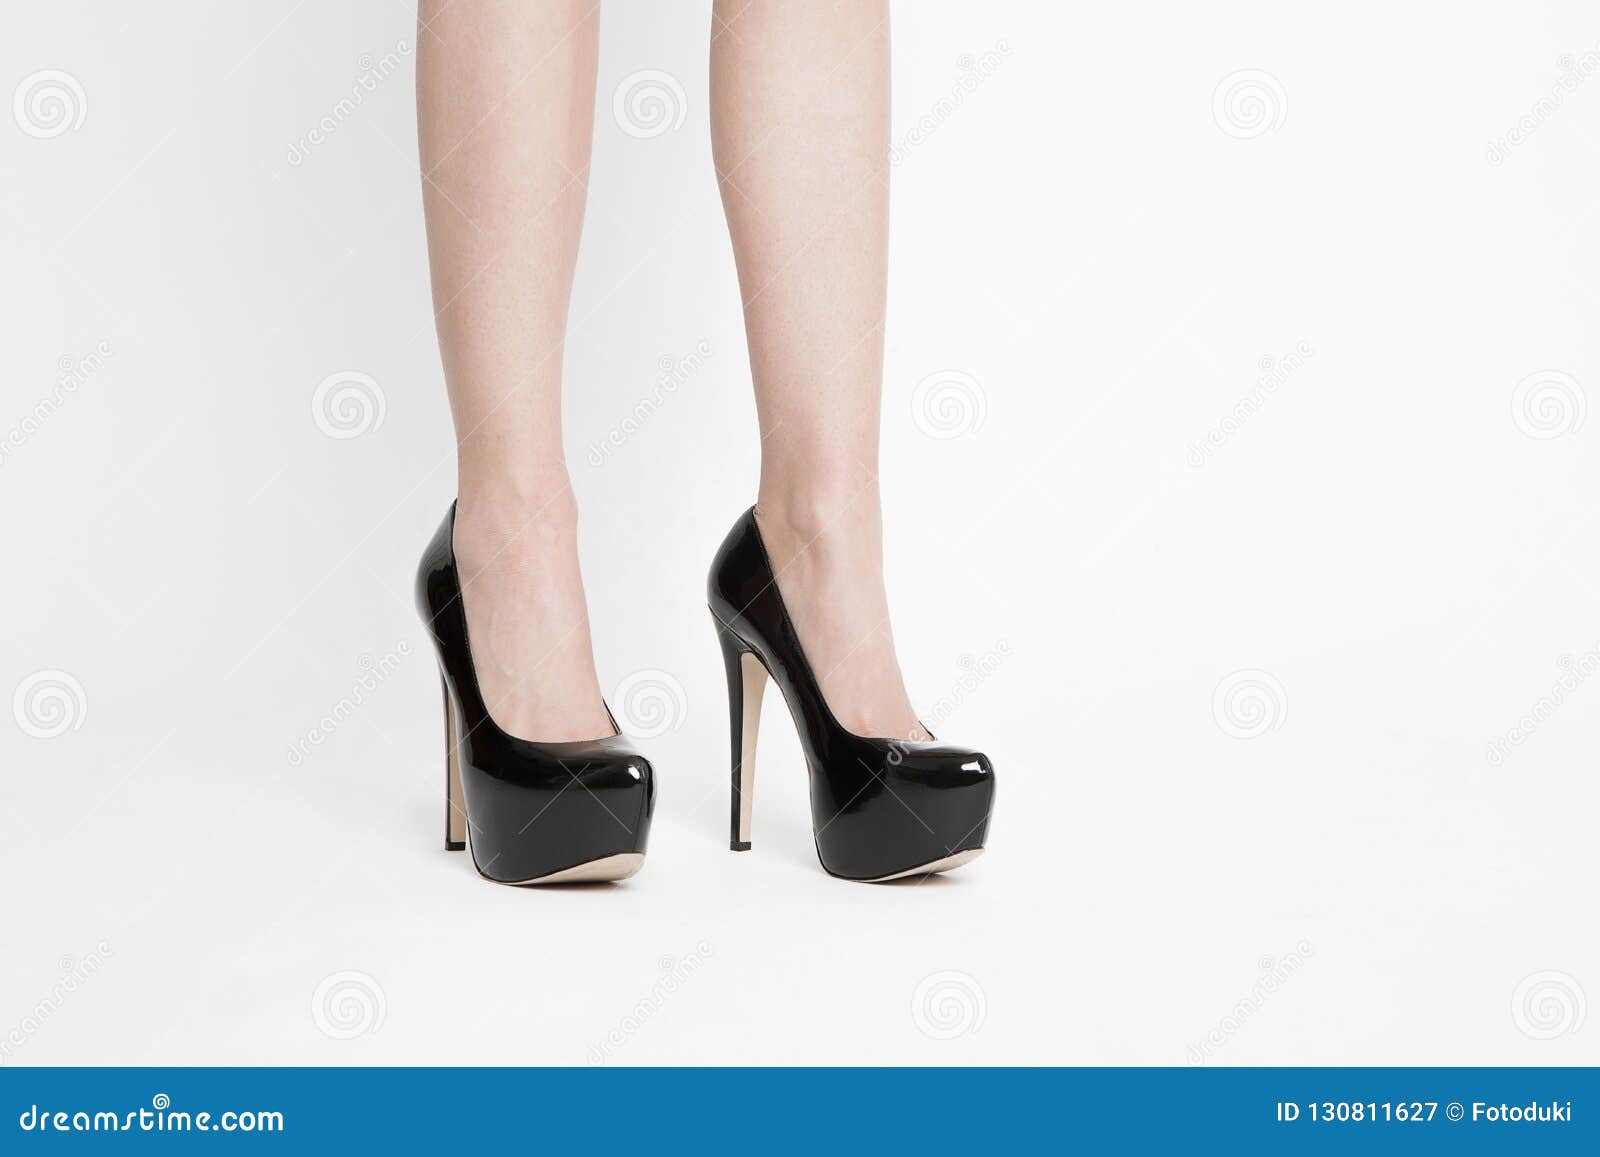 Cute Black Girl High Heel Shoes Stock Image - Image of long, person:  130811627